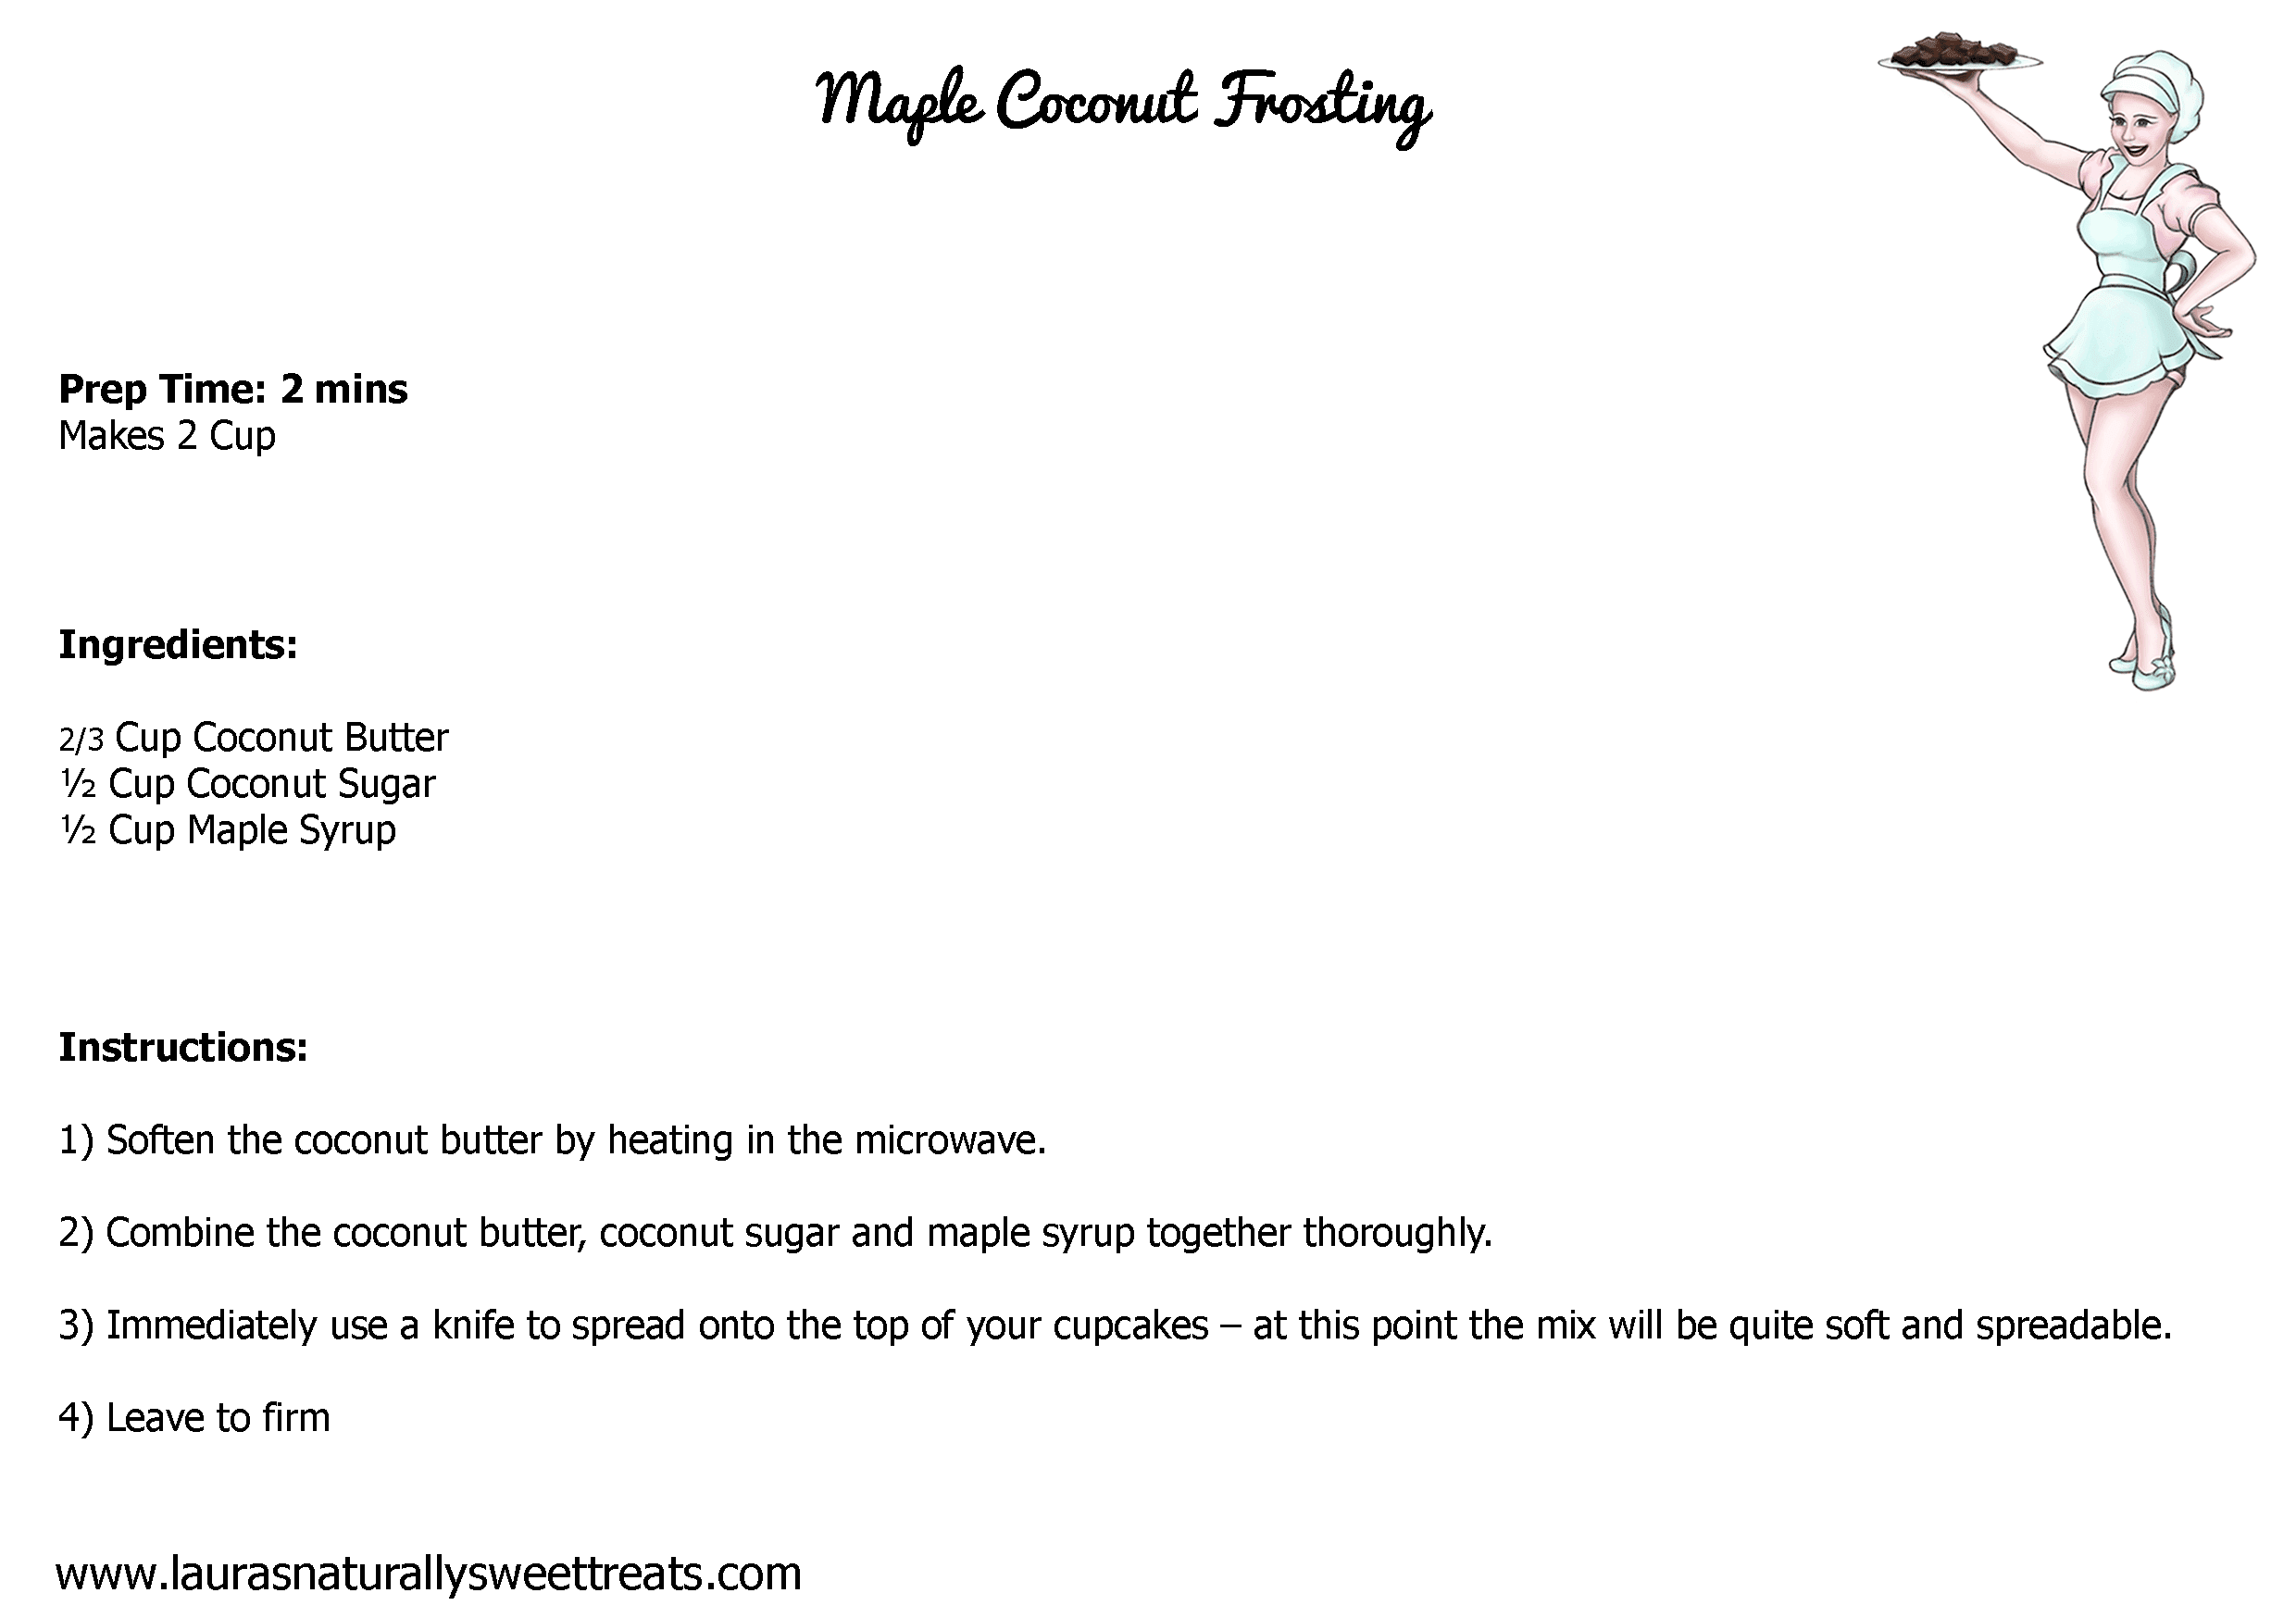 maple-coconut-frosting-recipe-card